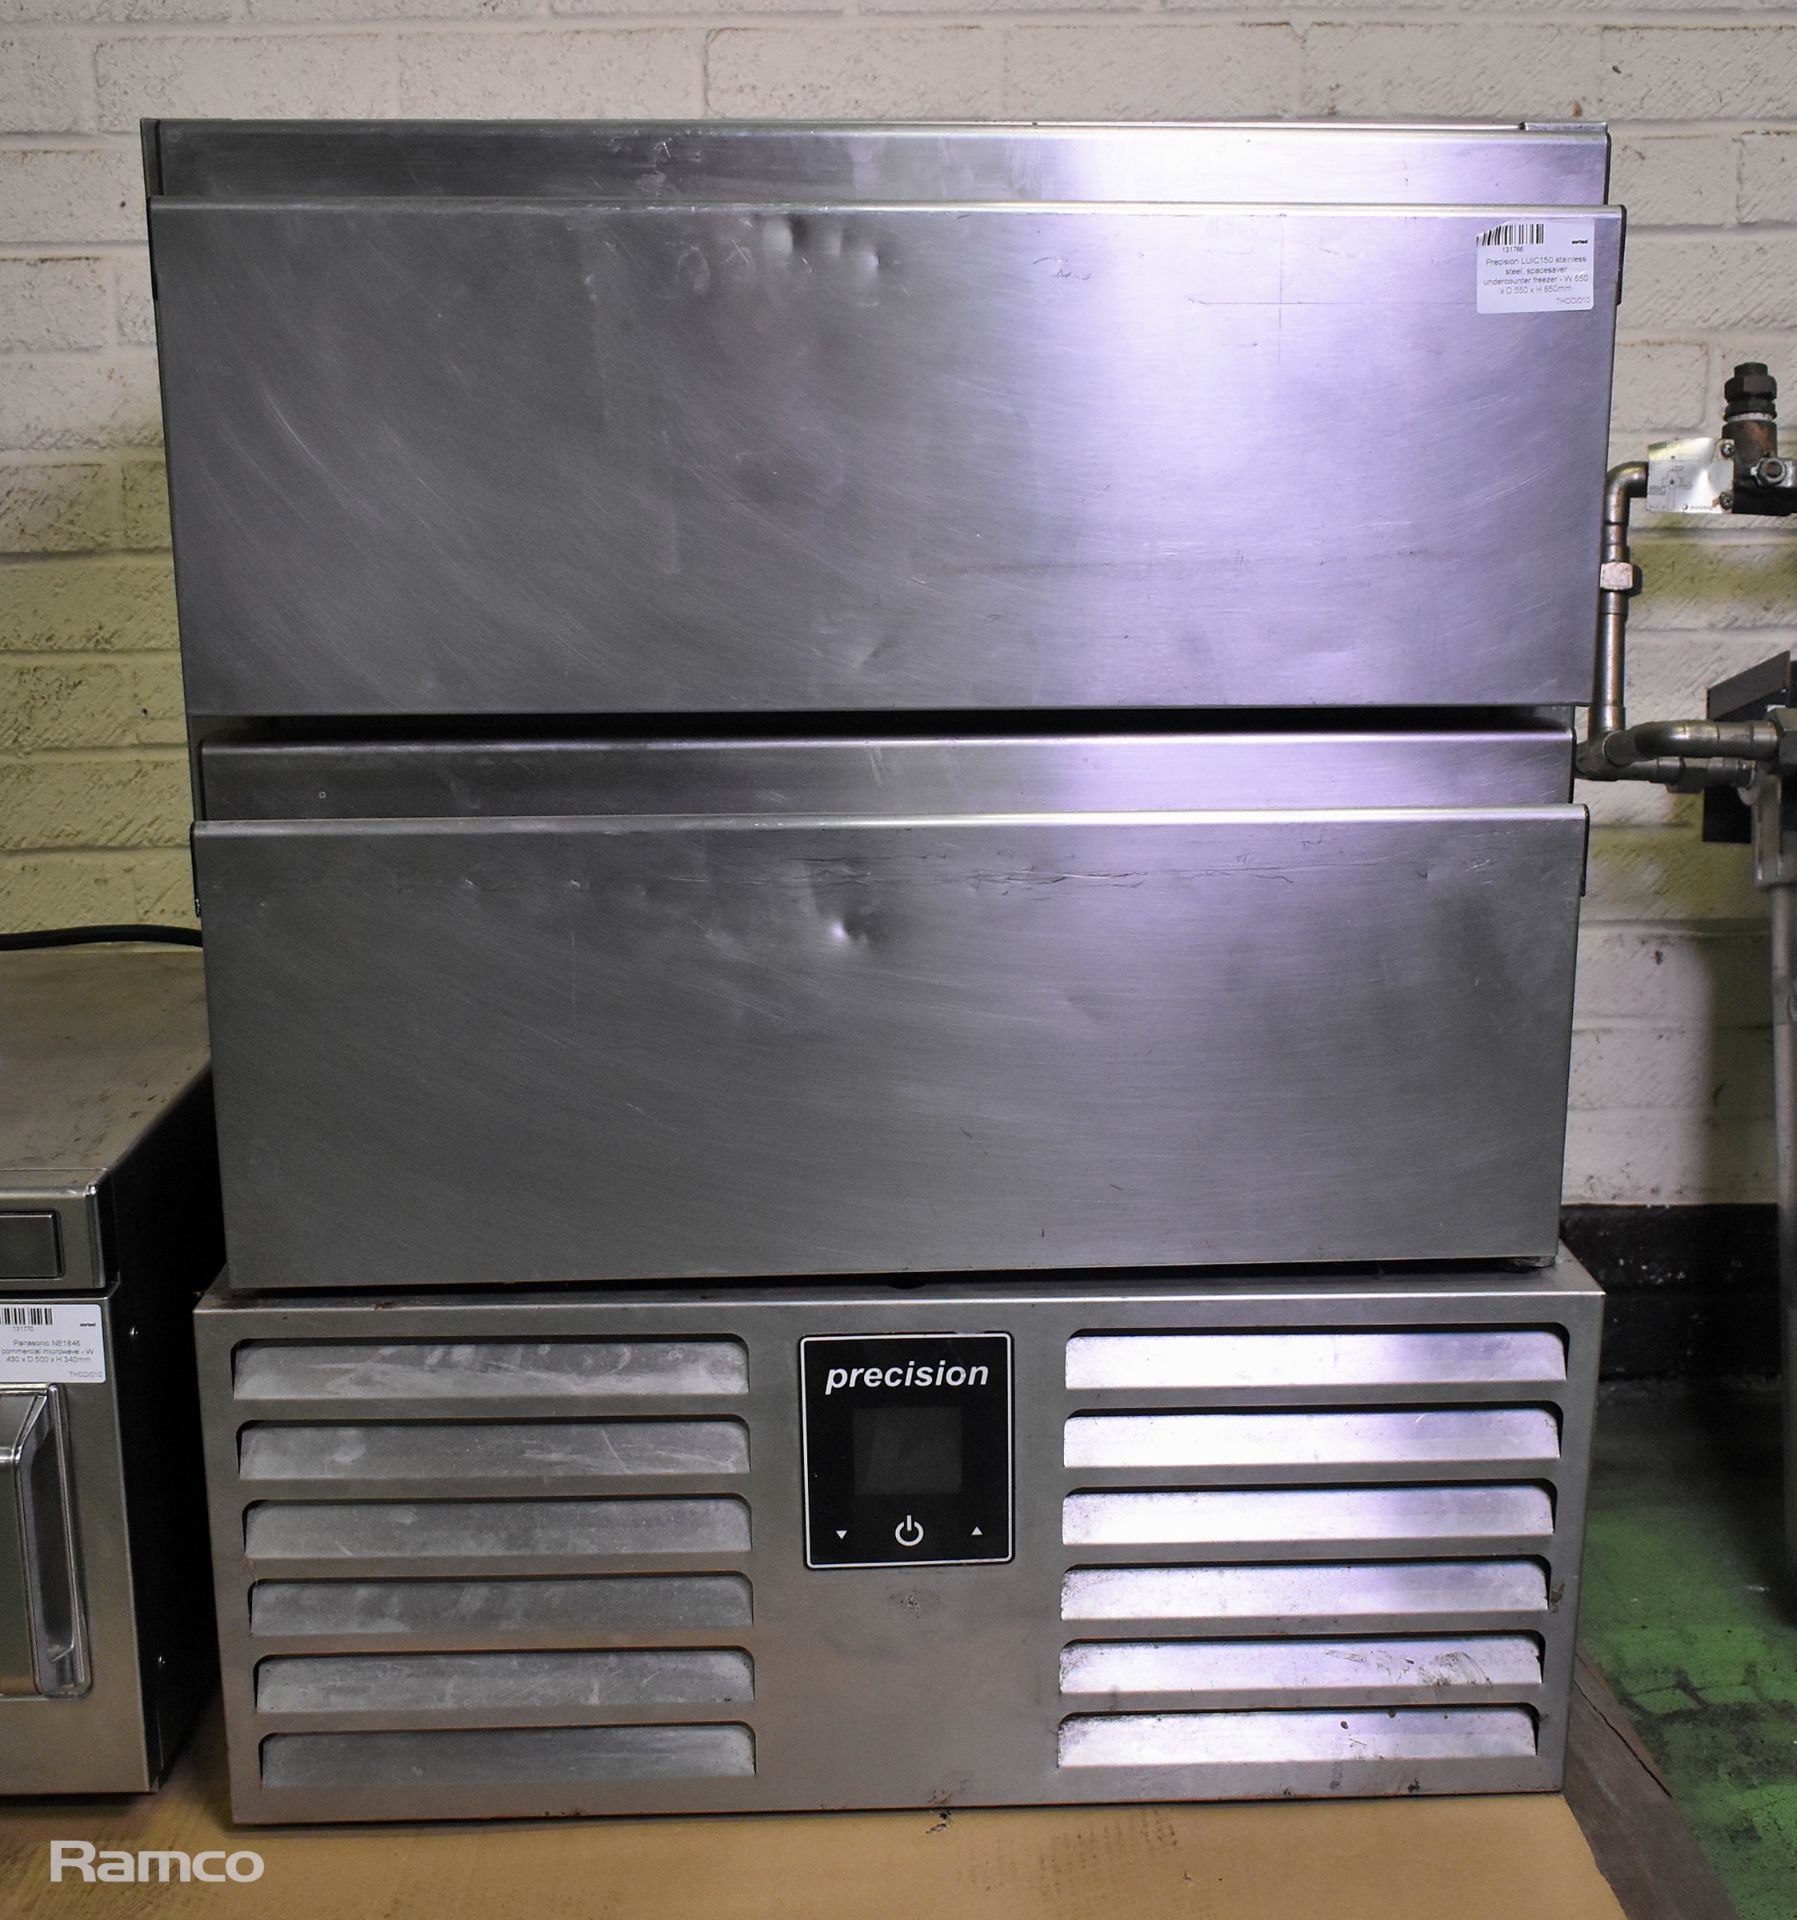 Precision LUIC150 stainless steel undercounter freezer - W 650 x D 550 x H 850mm - Image 2 of 6